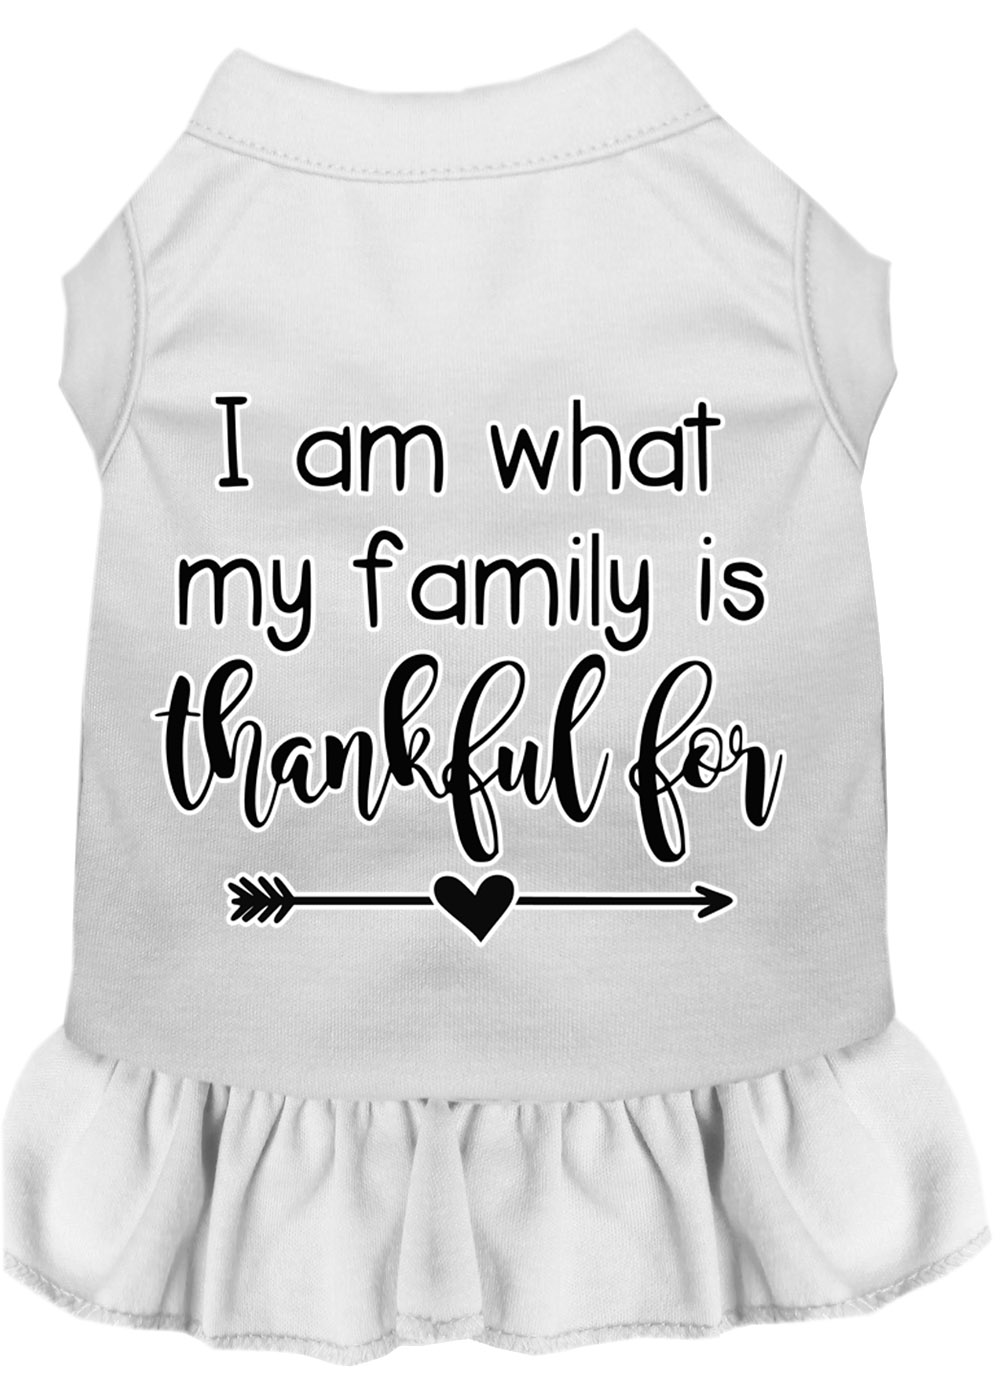 I Am What My Family is Thankful For Screen Print Dog Dress White Lg